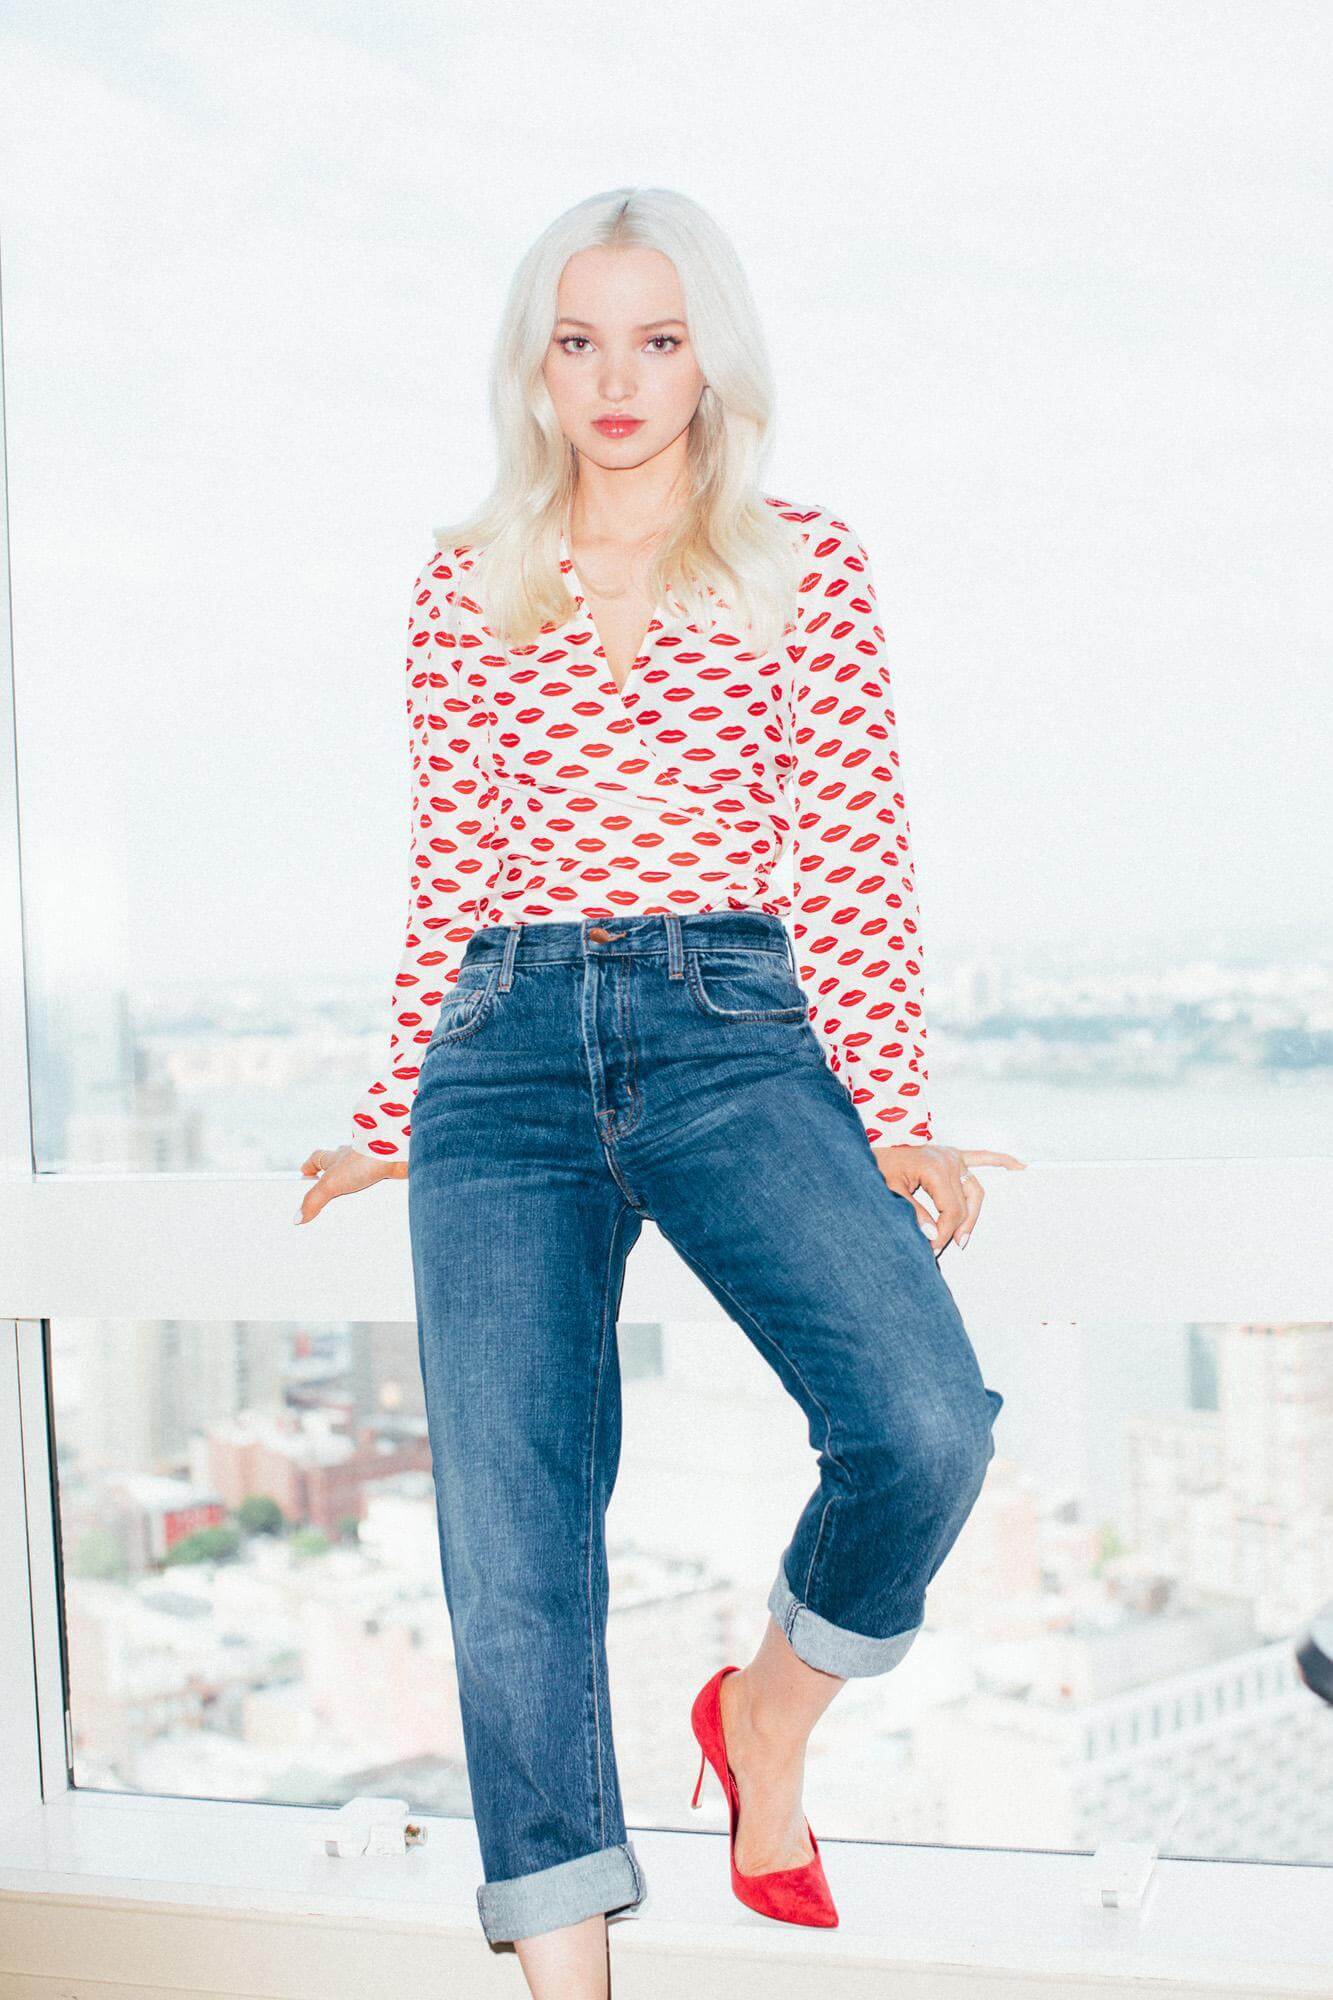 49 Sexy Dove Cameron Feet Pictures Will Make You Go Crazy For This Babe | Best Of Comic Books